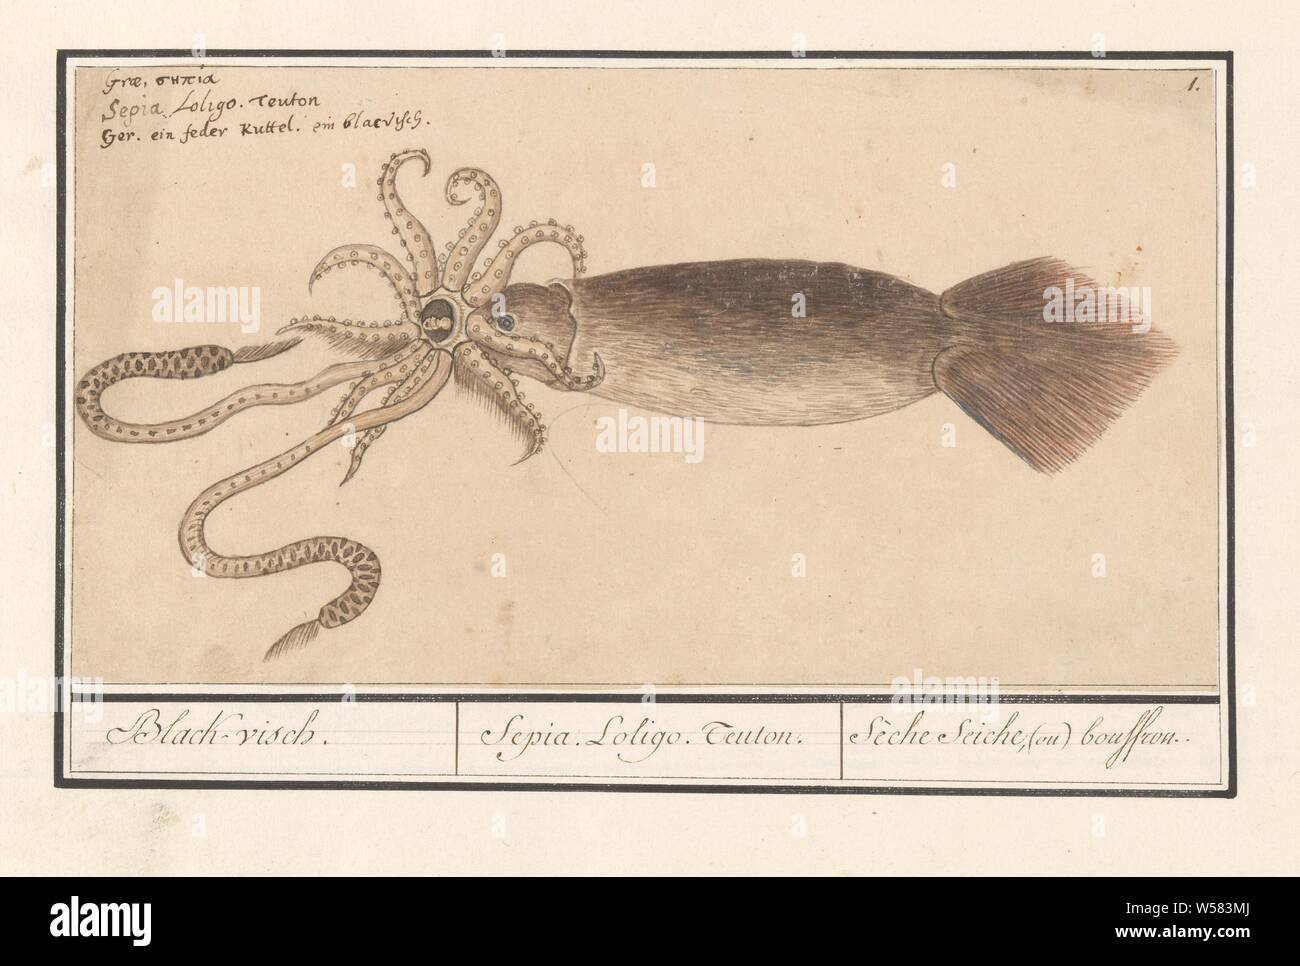 Ordinary squid (Loligo vulgaris), Black-fish. / Sepia. Loligo. Teuton. / Sèche seiche, (ou) bouffrou (title on object), Squid. Numbered top right: 1. Top left the name in three languages. Part of the sixth album with drawings of fish, shells and insects. Sixth of twelve albums with drawings of animals, birds and plants known around 1600, commissioned by Emperor Rudolf II. With explanation in Dutch, Latin and French, molluscs: squid, Anselmus Boetius de Boodt, 1596 - 1610, paper, pencil, chalk, watercolor (paint), deck paint, ink, pen, h 155 mm × w 288 mm Stock Photo